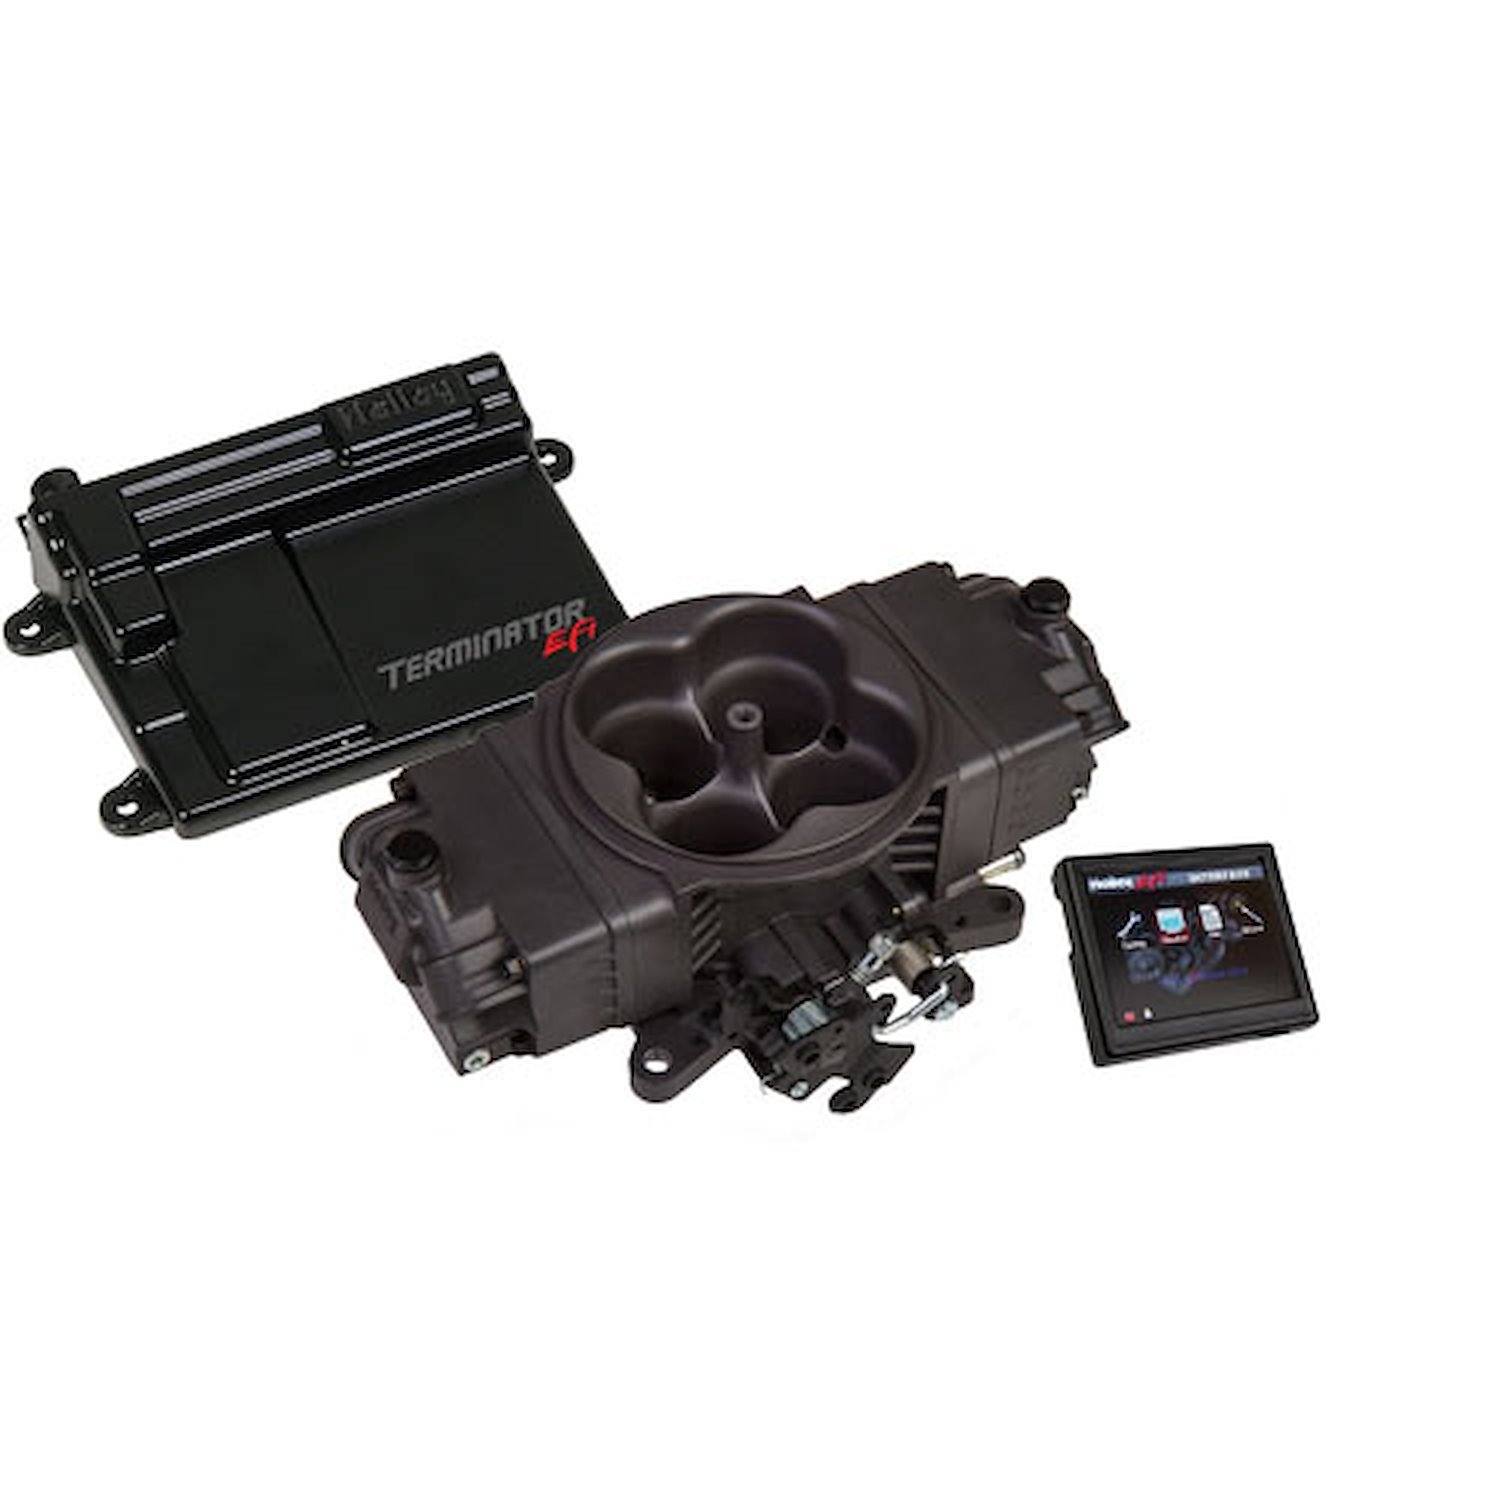 Terminator Stealth EFI 4bbl Throttle Body Fuel Injection System